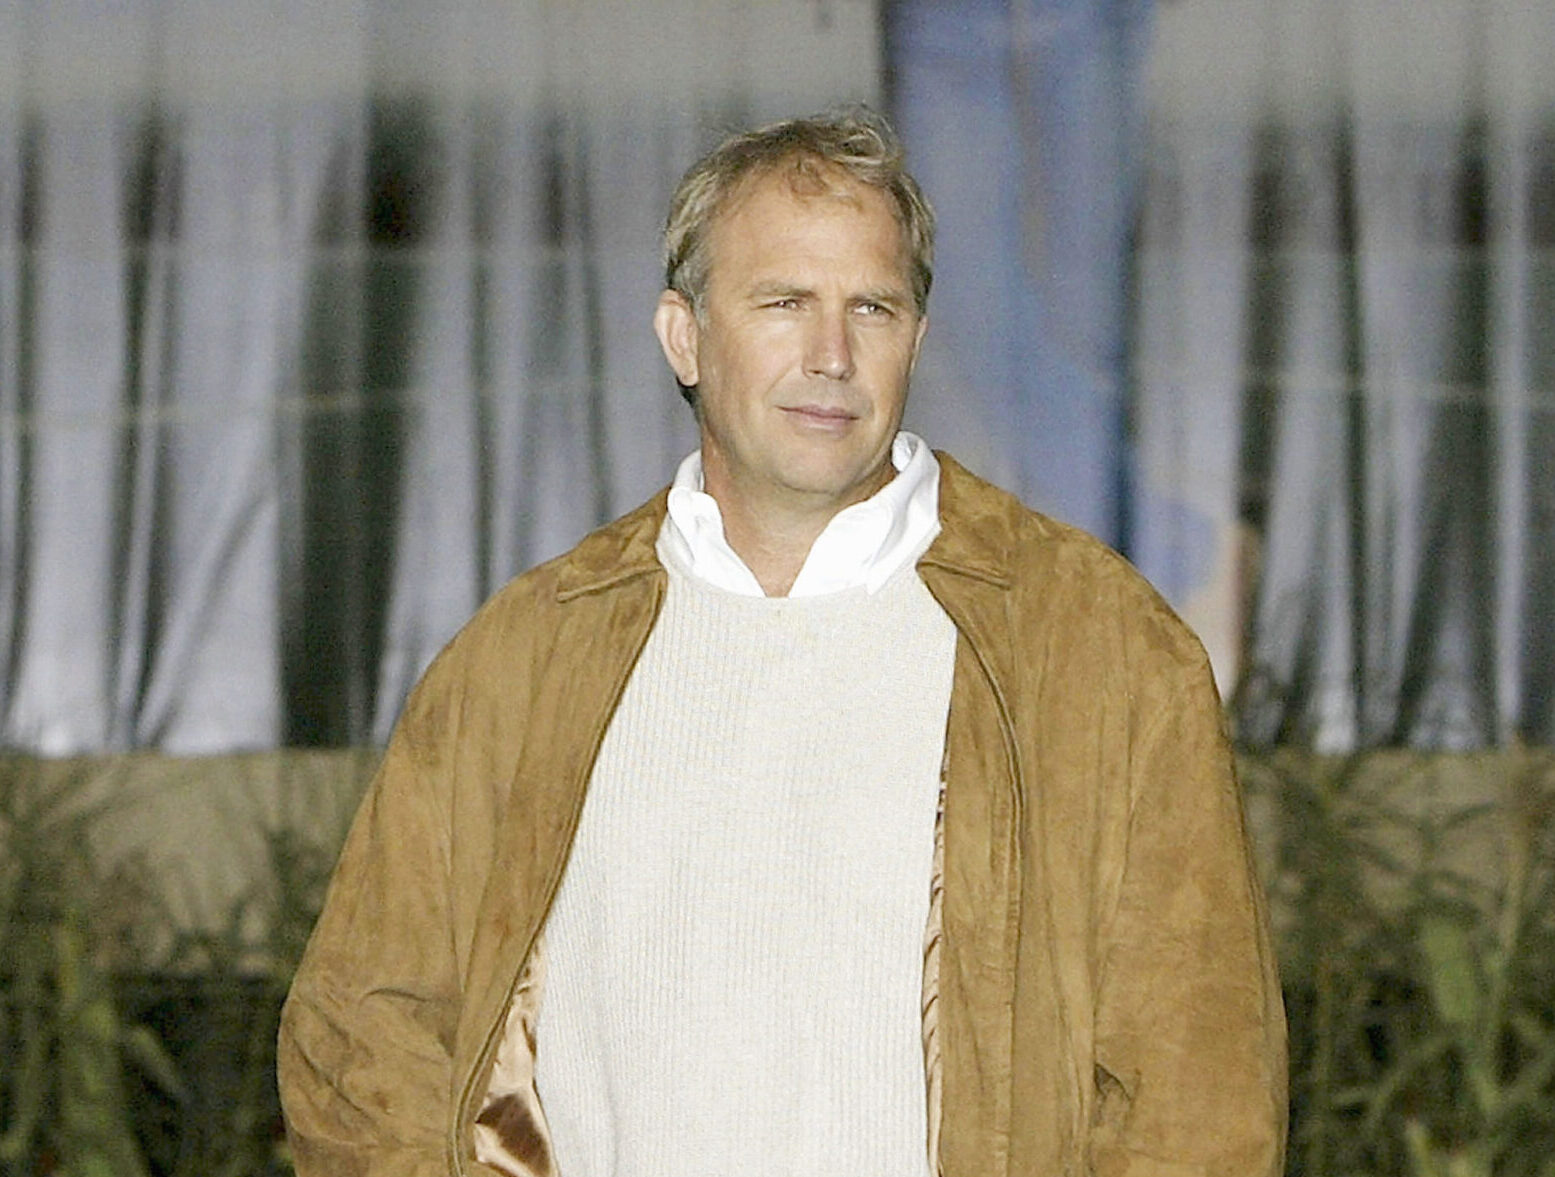 Kevin Costner returns to the cornfield for the 'Field of Dreams' game -  Upworthy